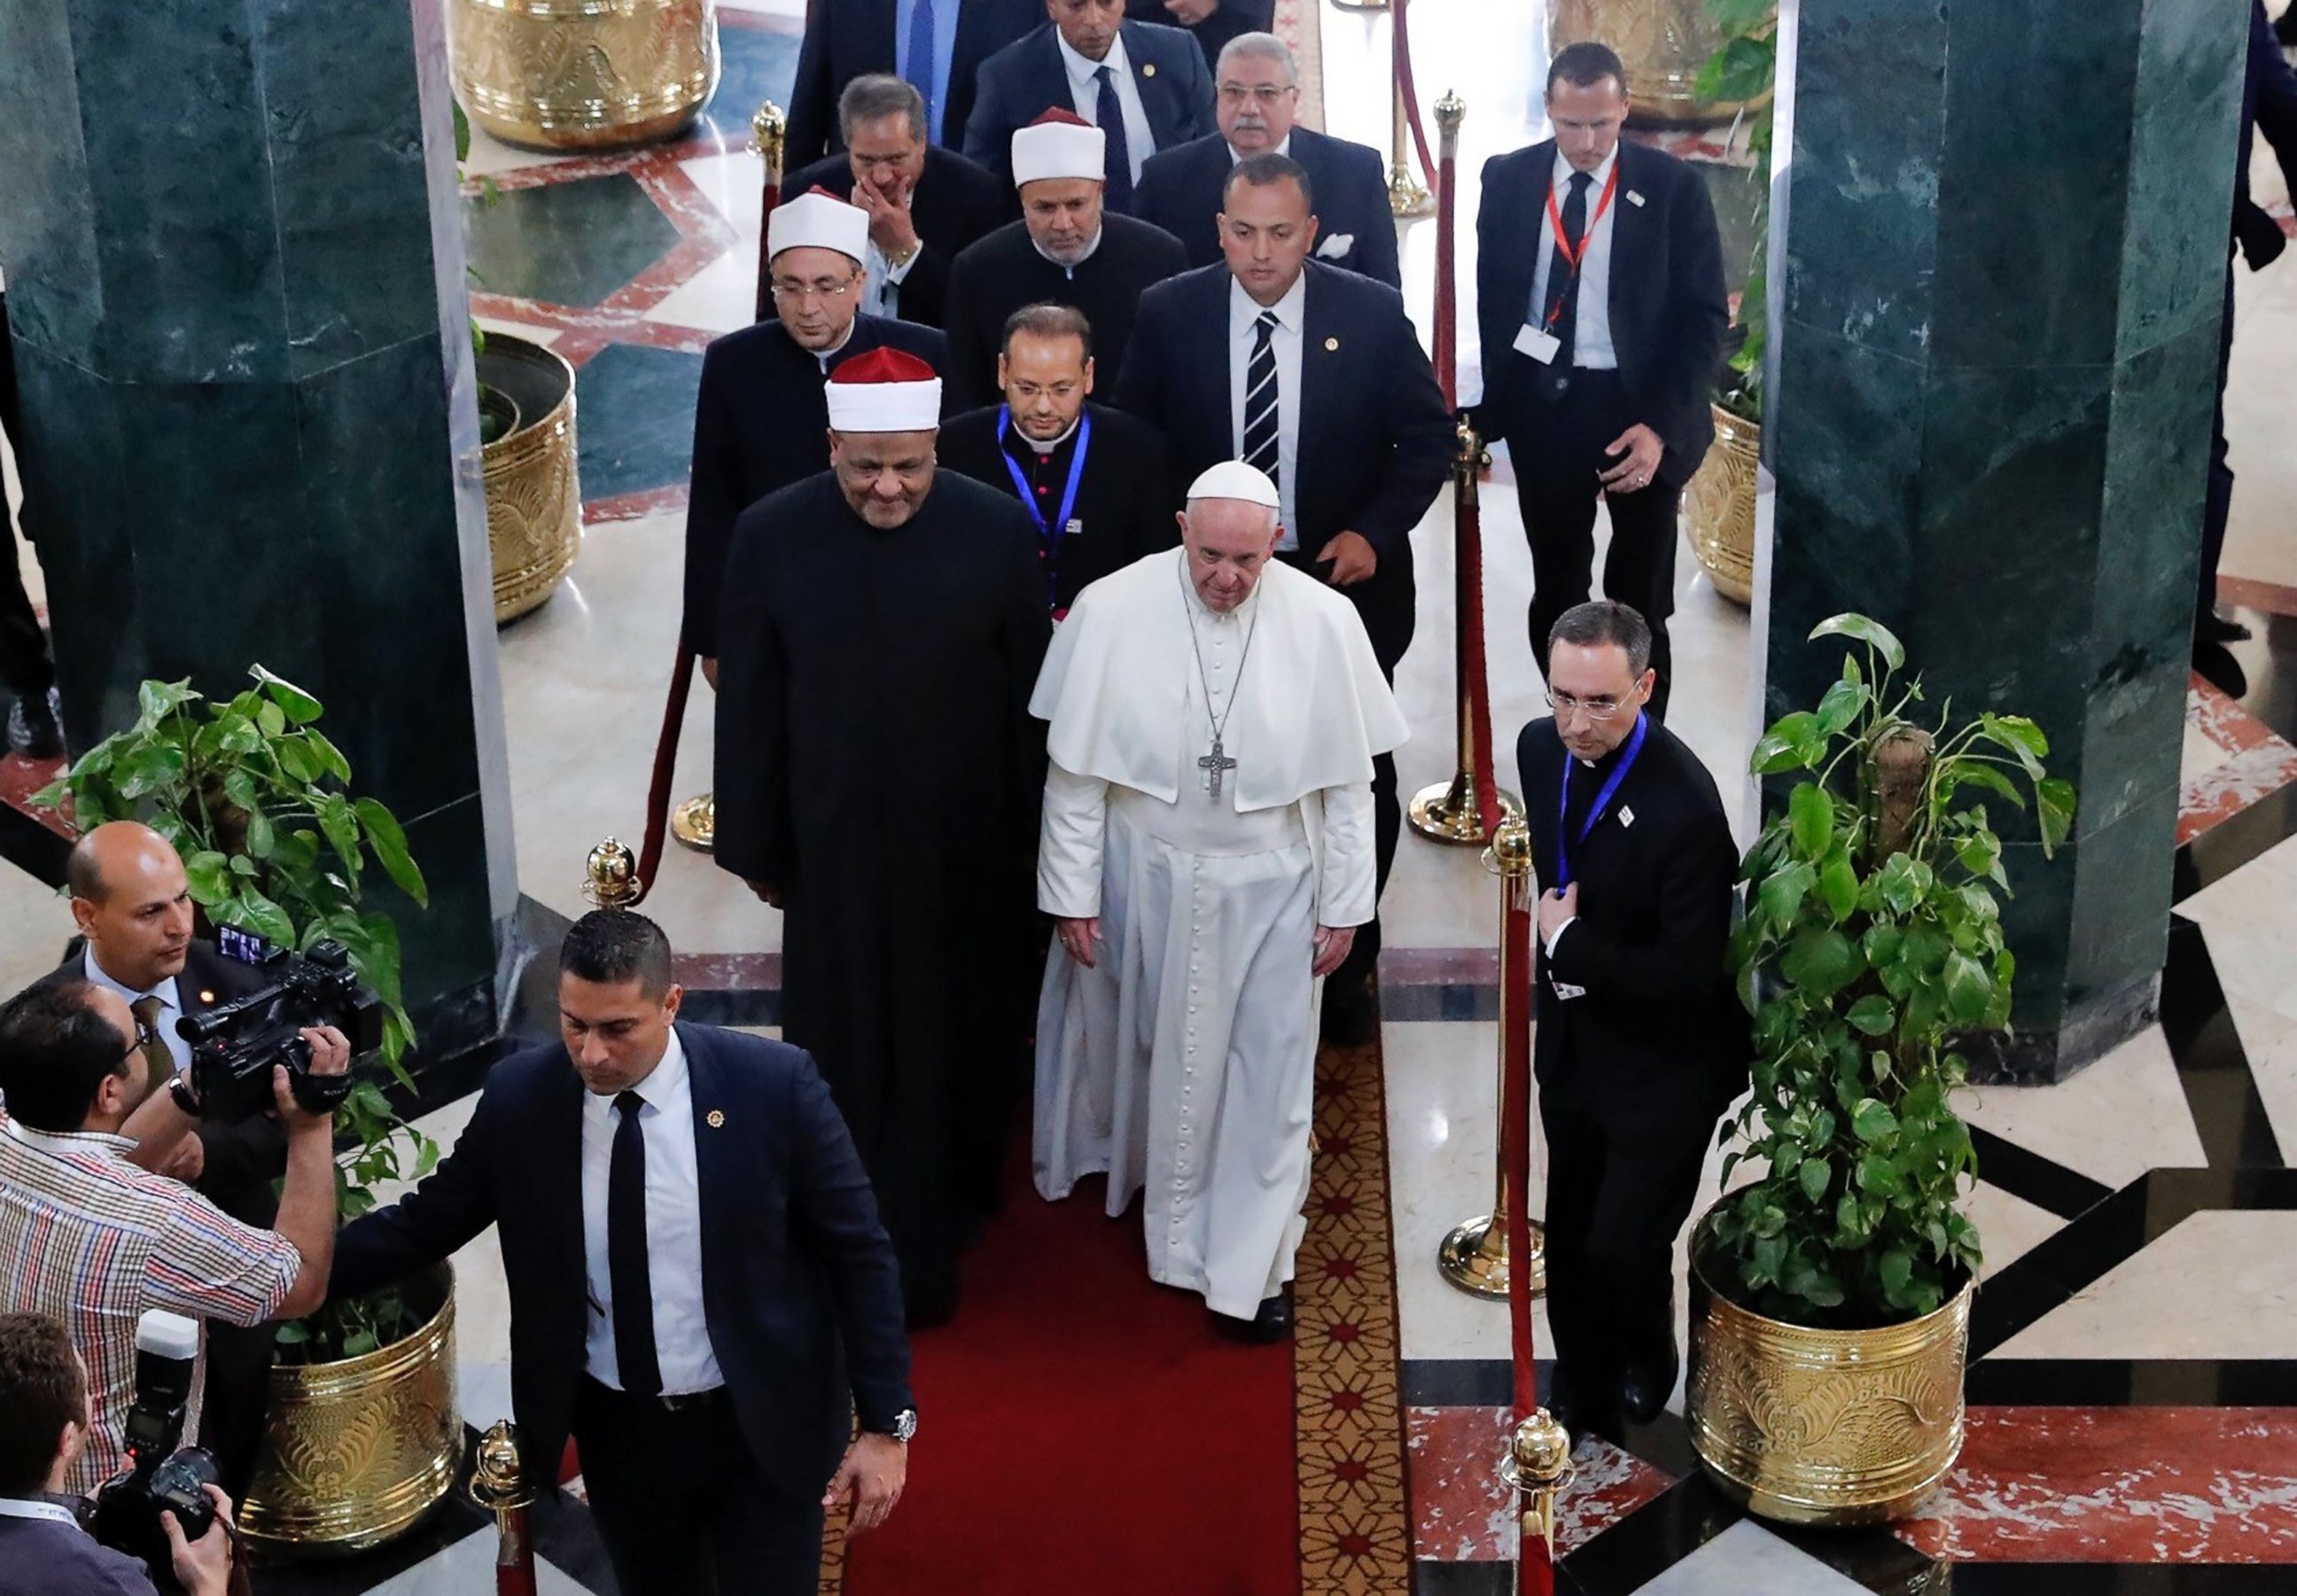 PHOTO: Pope Francis walks alongside Muslim clerics during a visit at the prestigious Sunni institution Al-Azhar, in Cairo, on April 28, 2017, during an official visit to Egypt.
